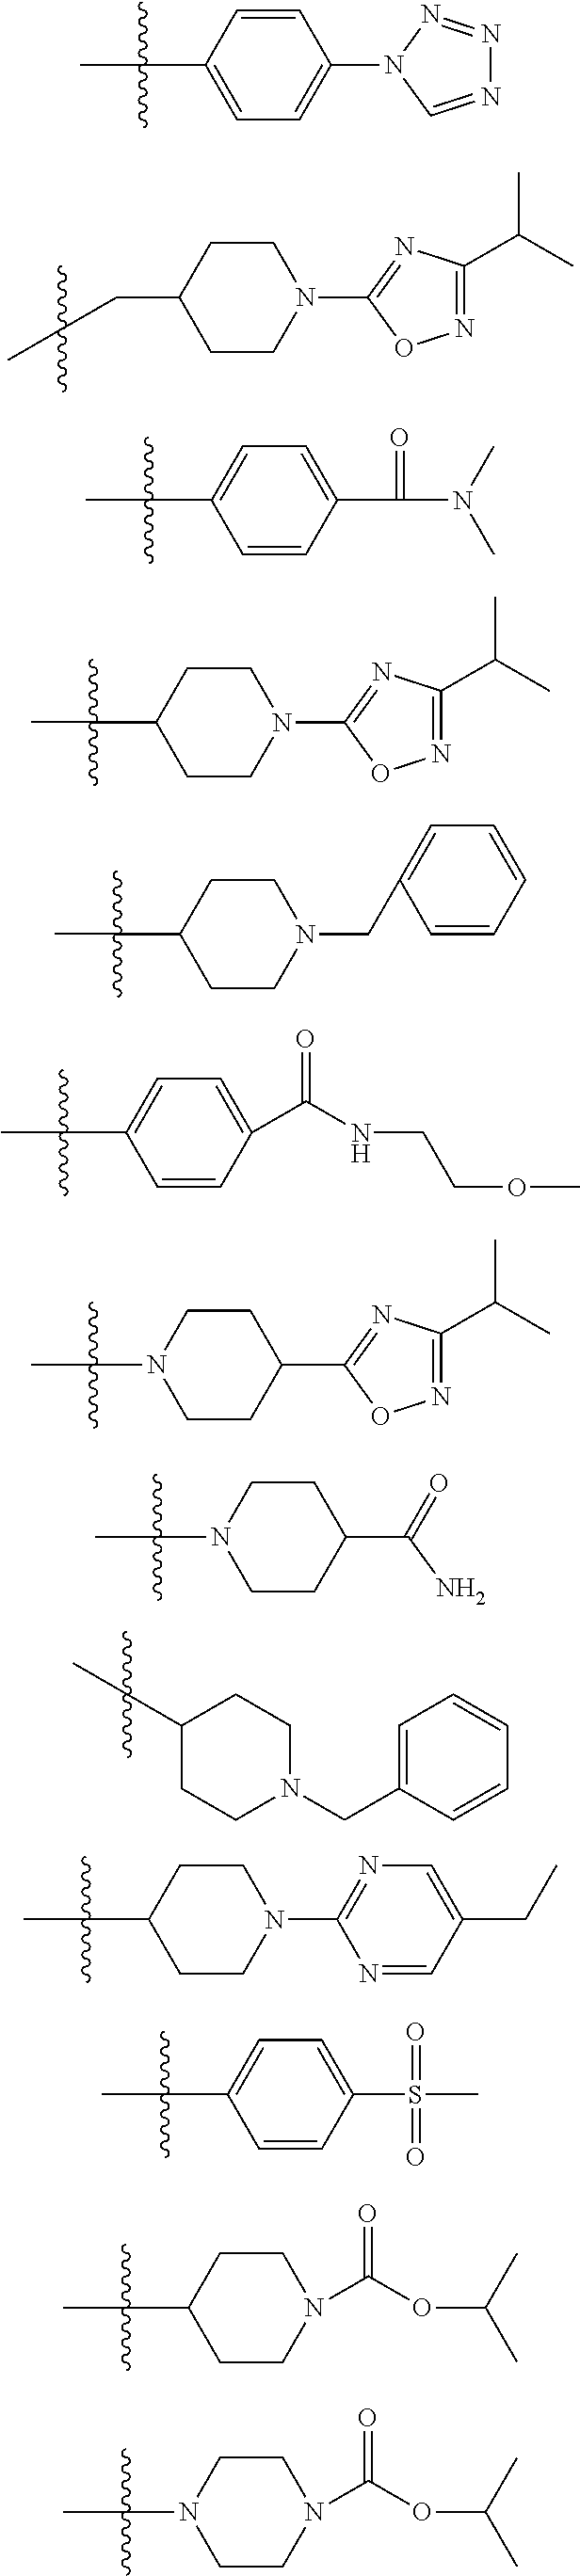 GPR119 agonist compounds